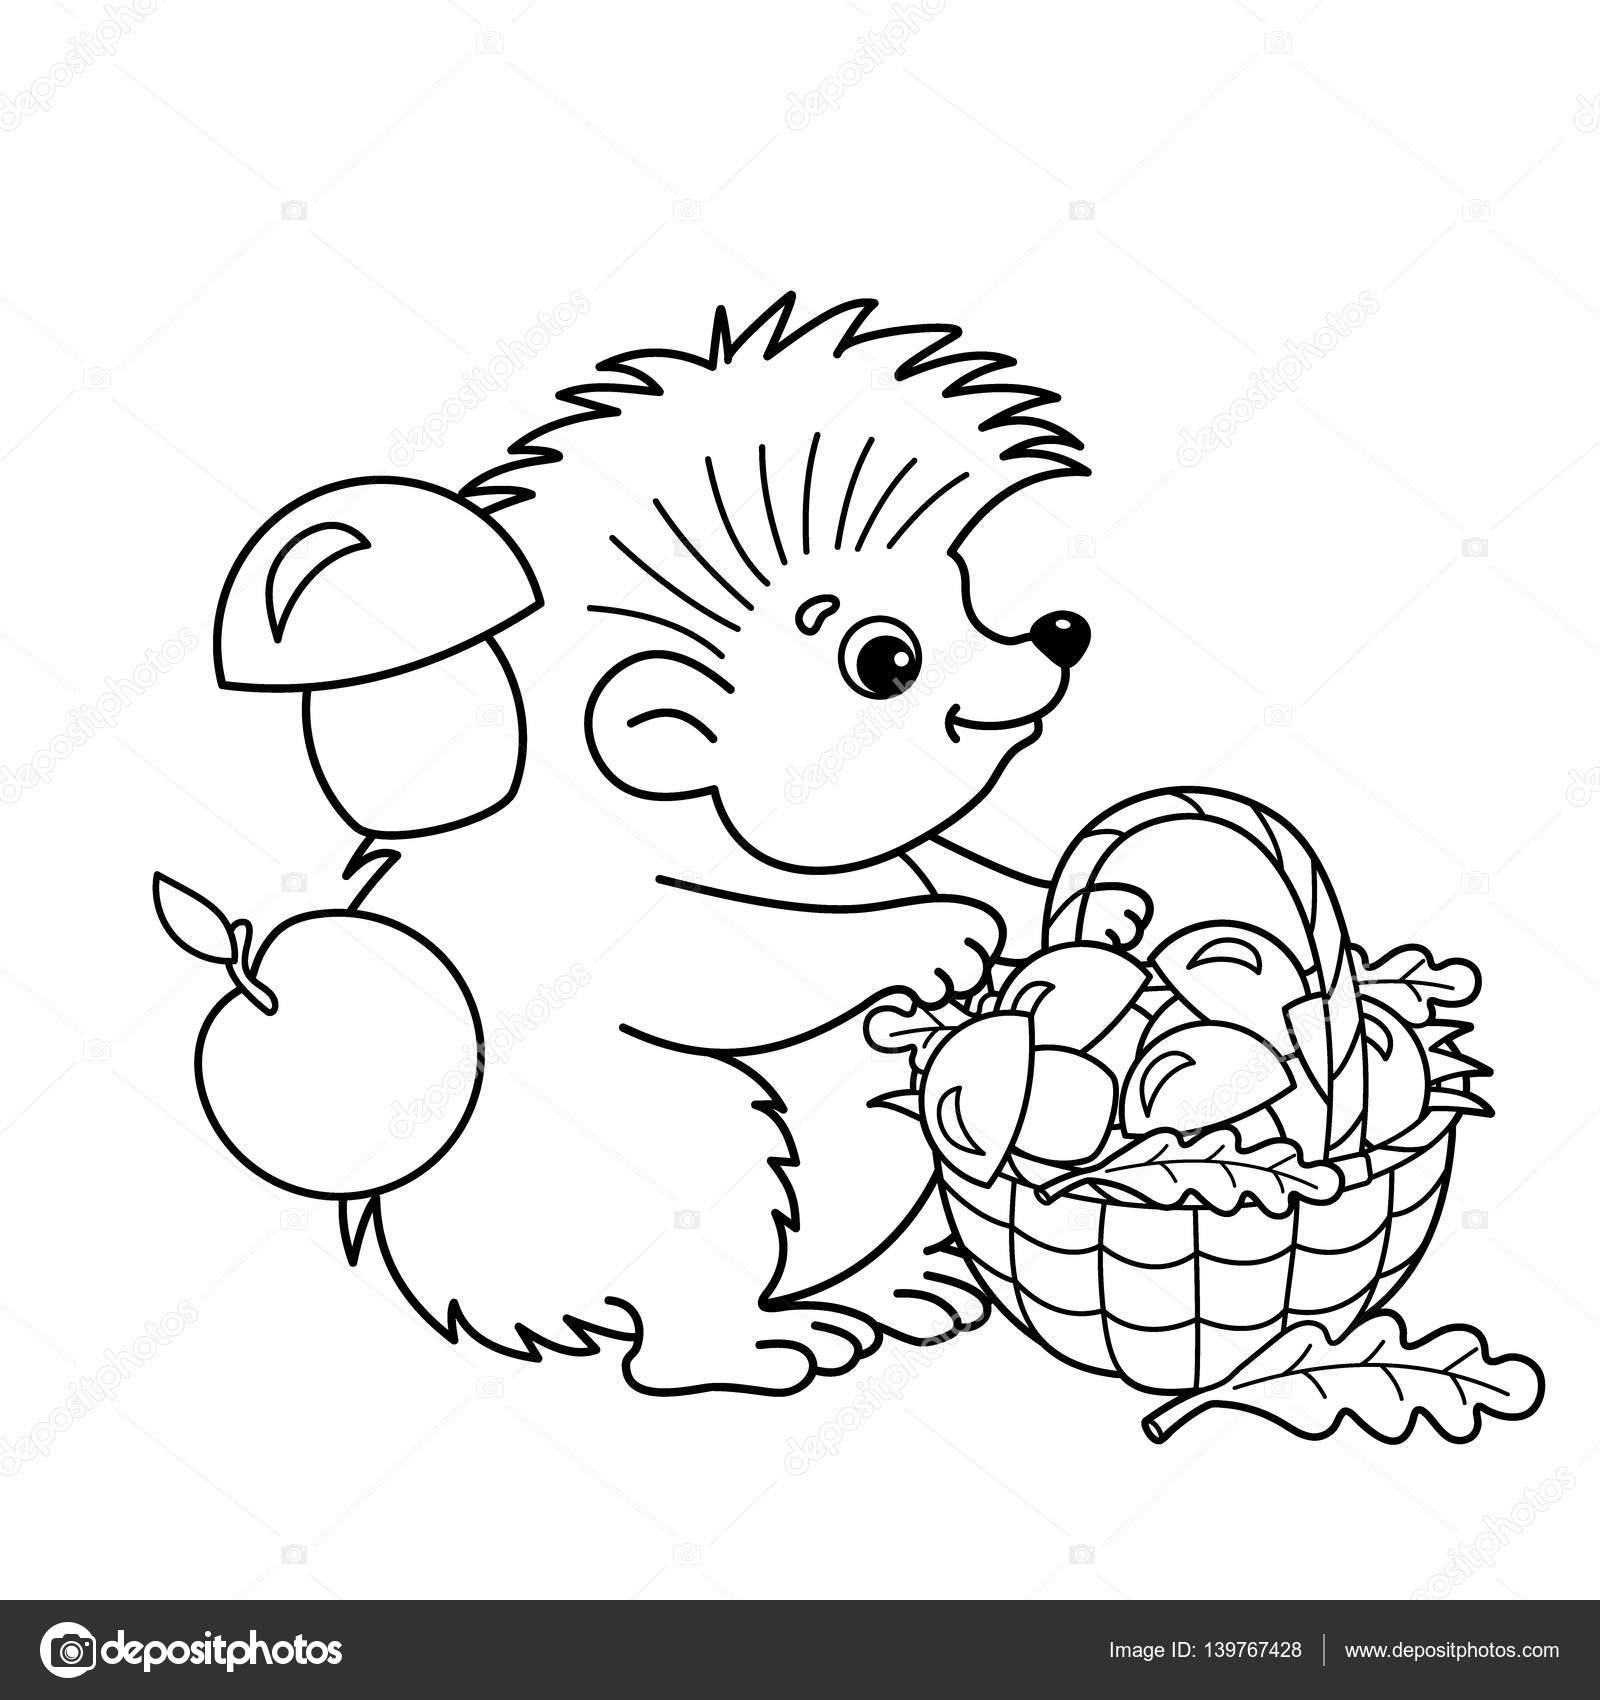 Coloring page outline of cartoon hedgehog with basket of mushrooms summer gifts of nature coloring book for kids stock vector by oleon